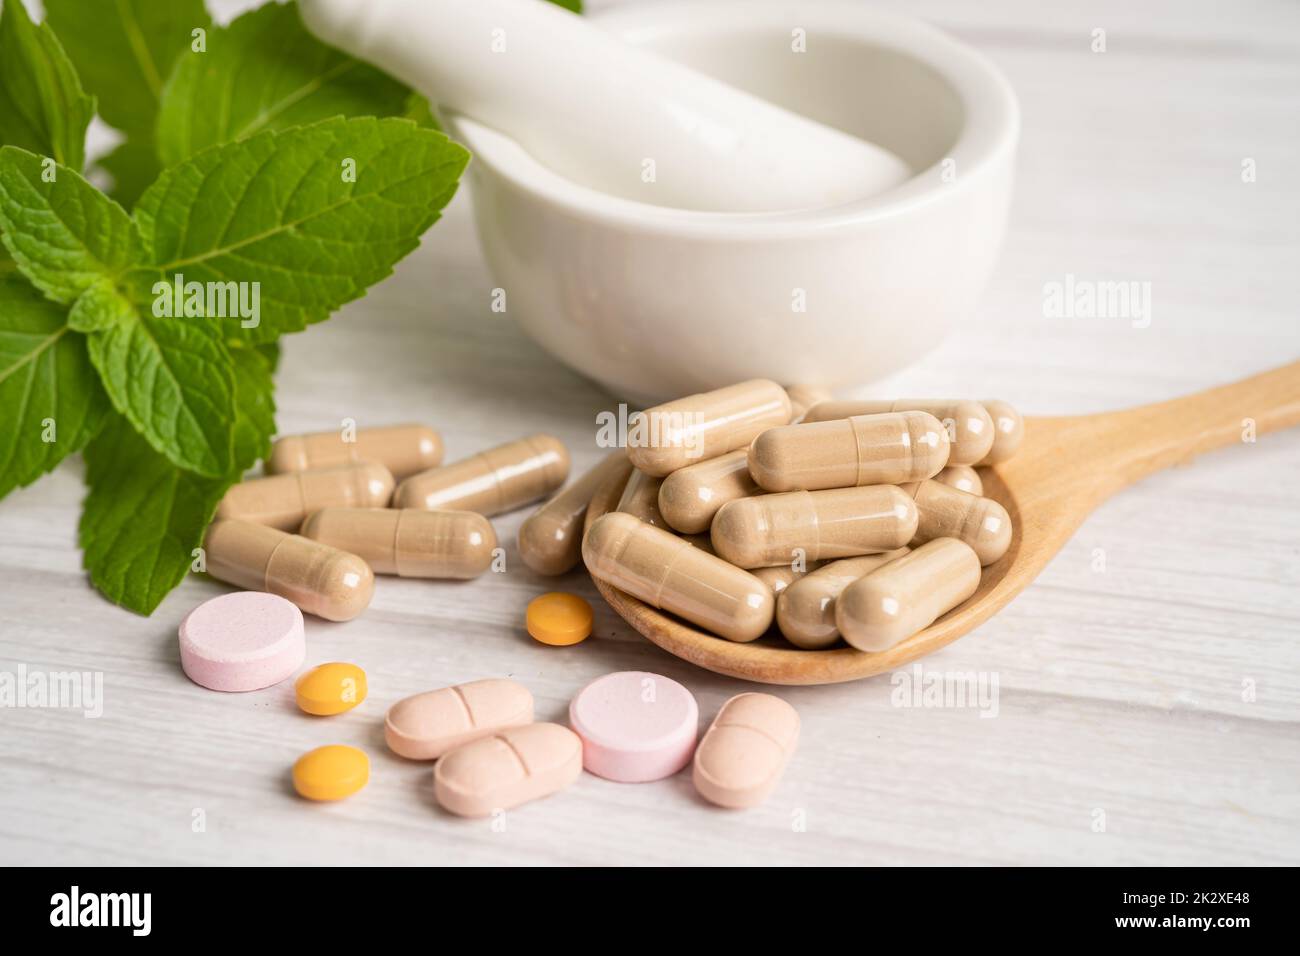 Alternative medicine herbal organic capsule with vitamin E omega 3 fish oil, mineral, drug with herbs leaf natural supplements for healthy good life. Stock Photo